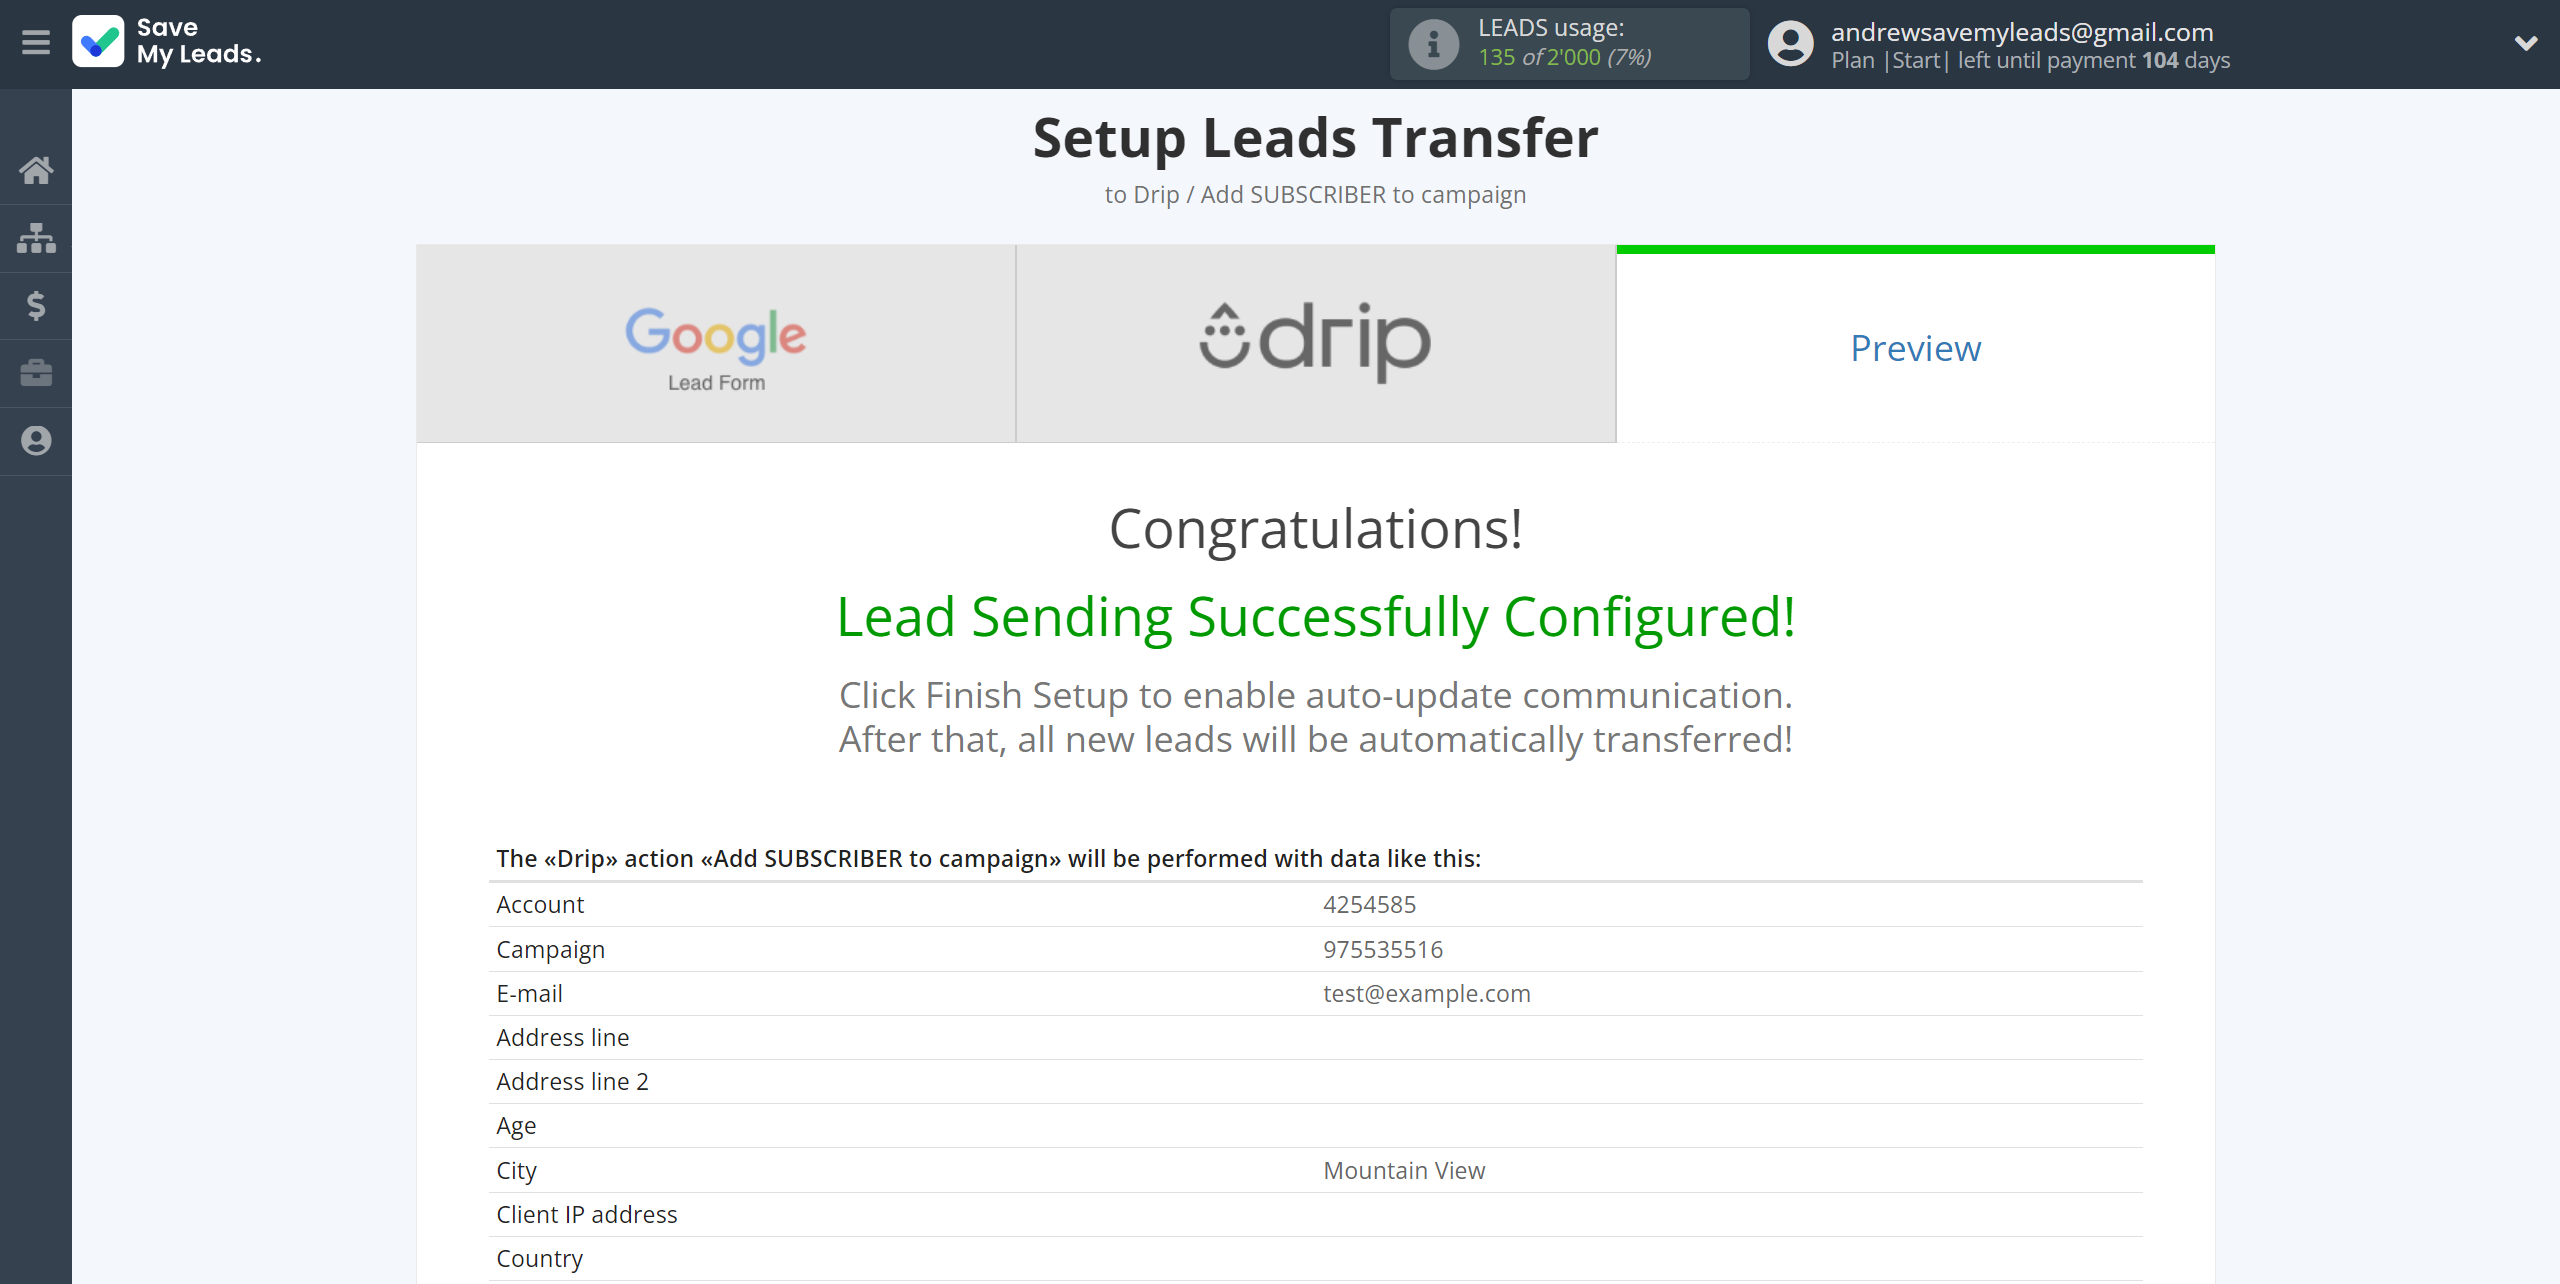 How to Connect Google Lead Form with Drip Add Subscribers to campaign | Test data